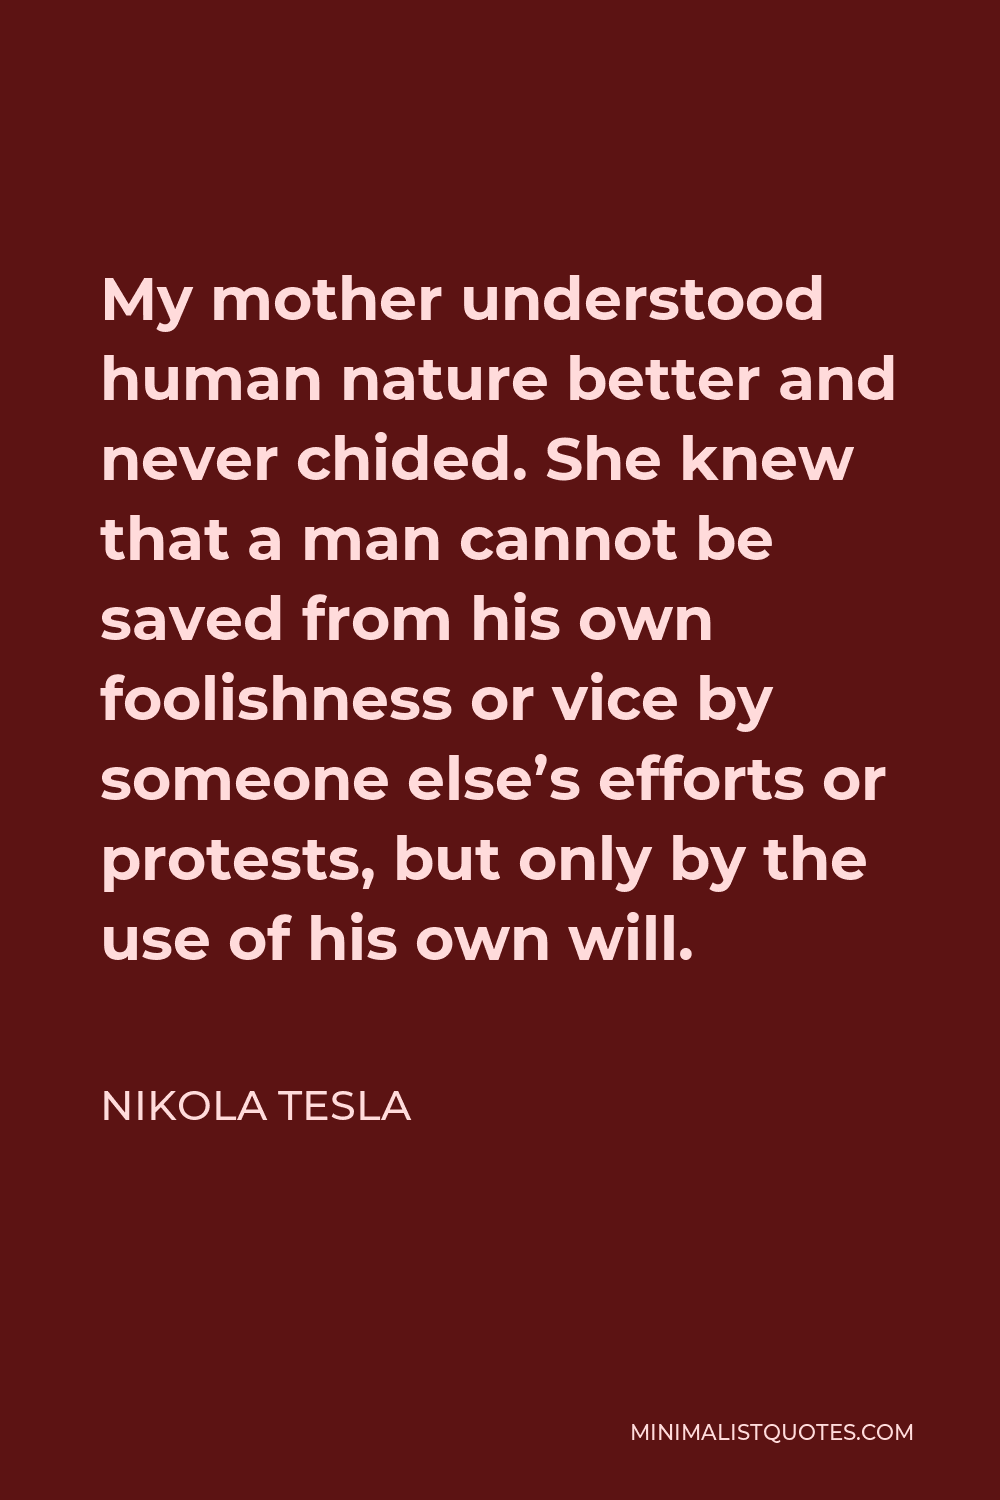 Nikola Tesla Quote - My mother understood human nature better and never chided. She knew that a man cannot be saved from his own foolishness or vice by someone else’s efforts or protests, but only by the use of his own will.